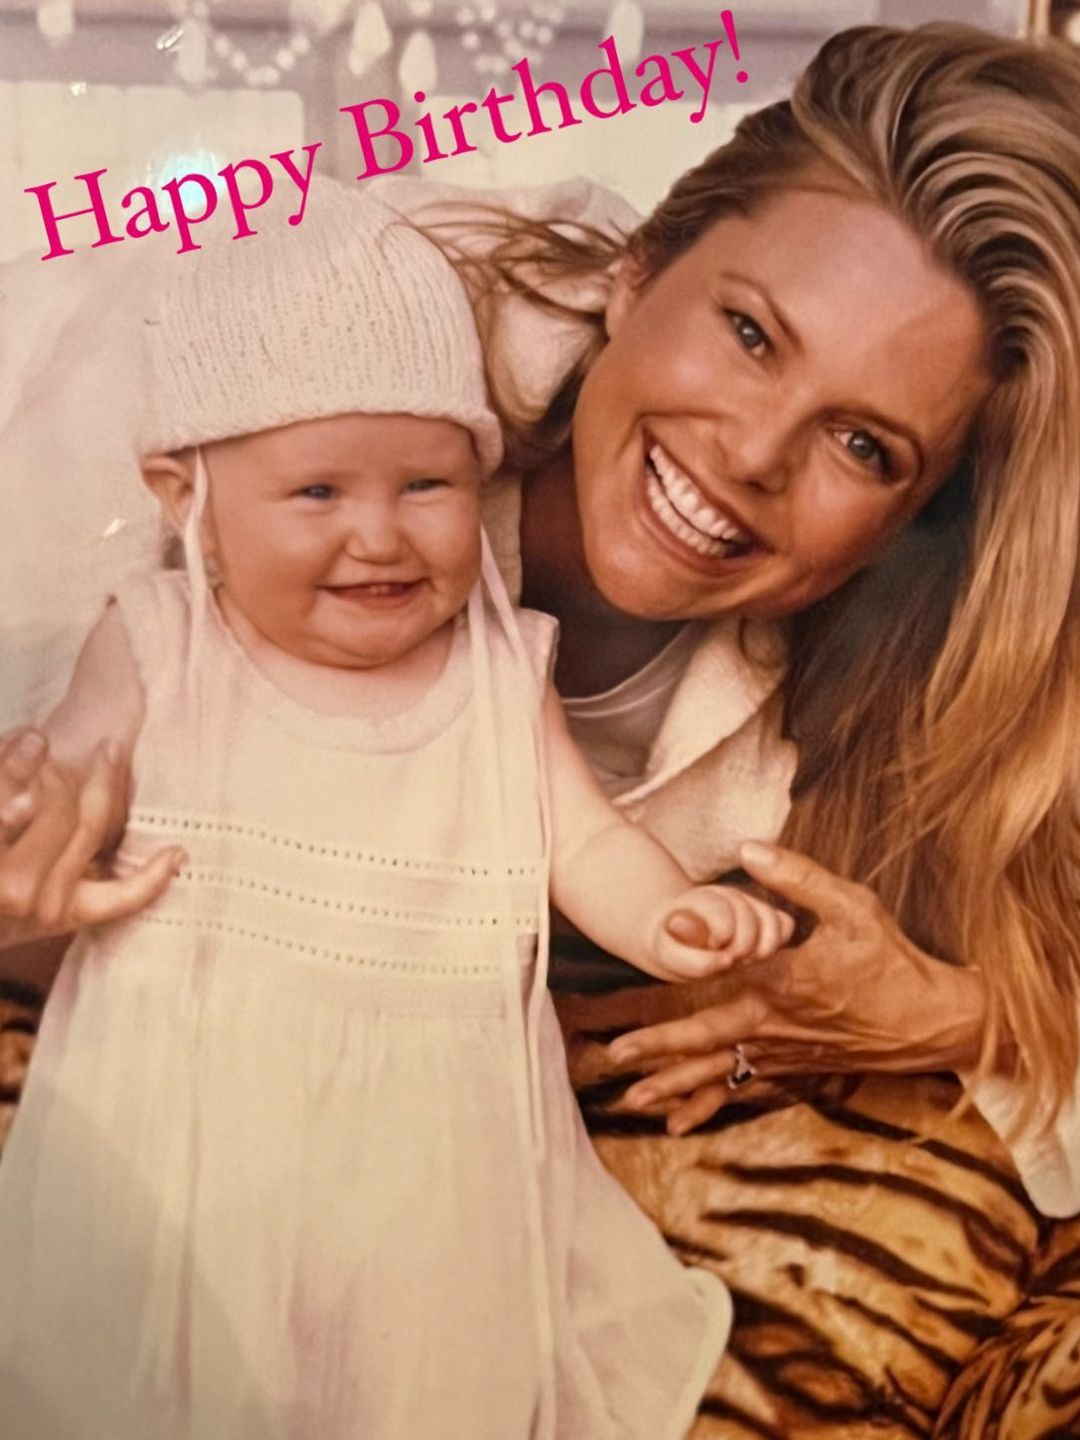 Christie smiling while helping a baby Sailor walk in an old photo